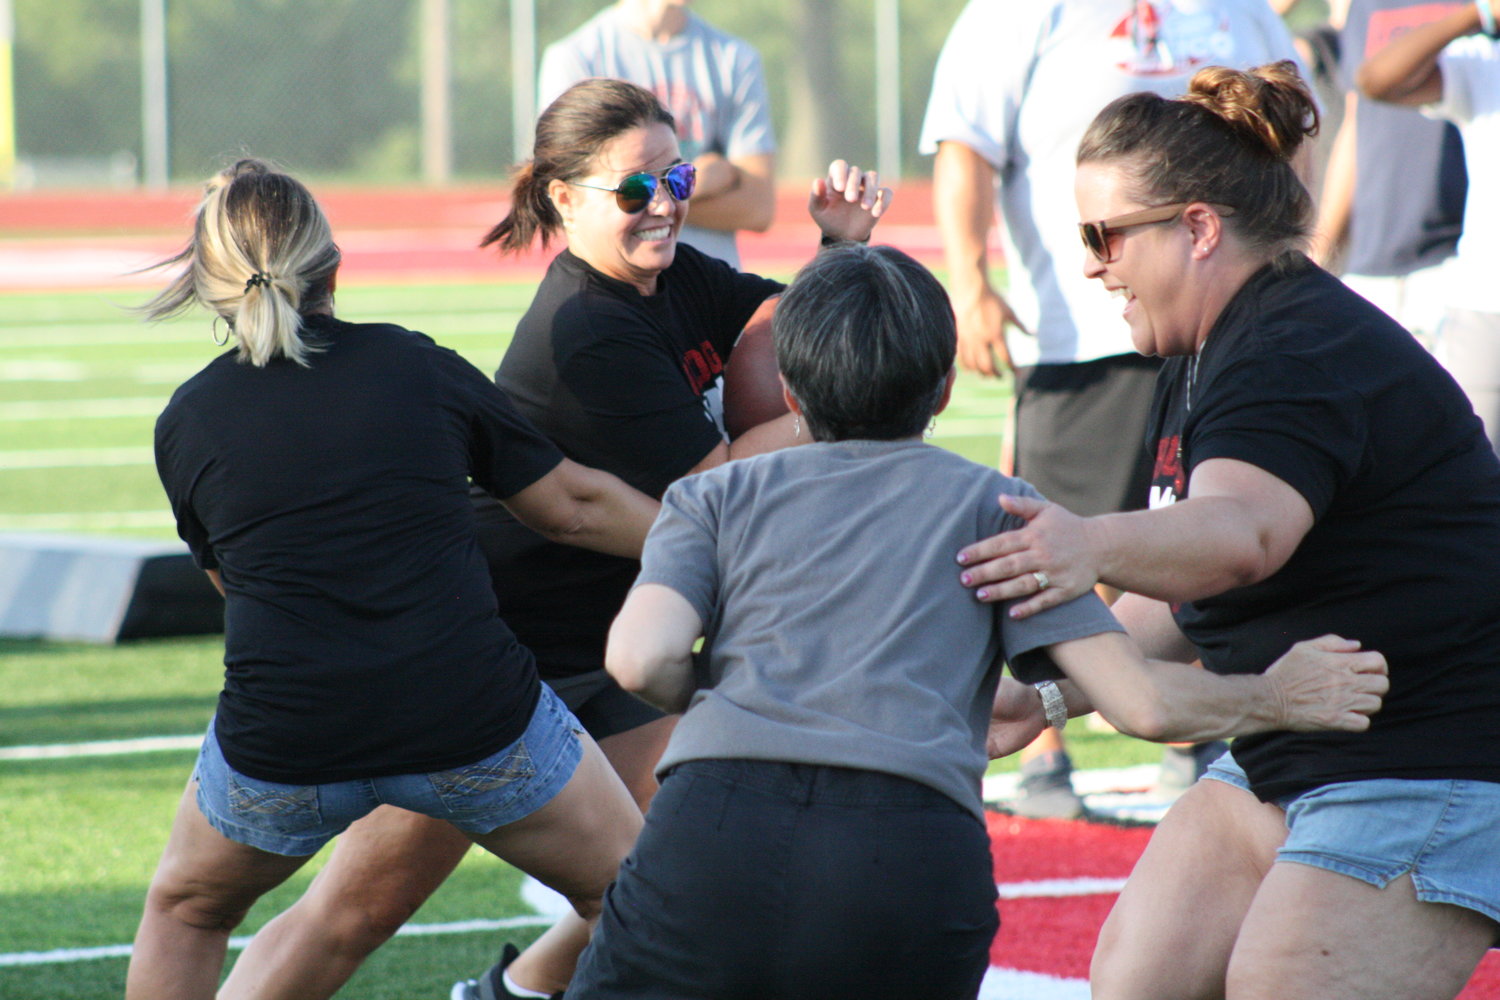 Mexico football hosted its annual moms clinic Friday night at Mexico High School. The Bulldogs are assisted by their mothers throughout the season and hold this event to give something back.